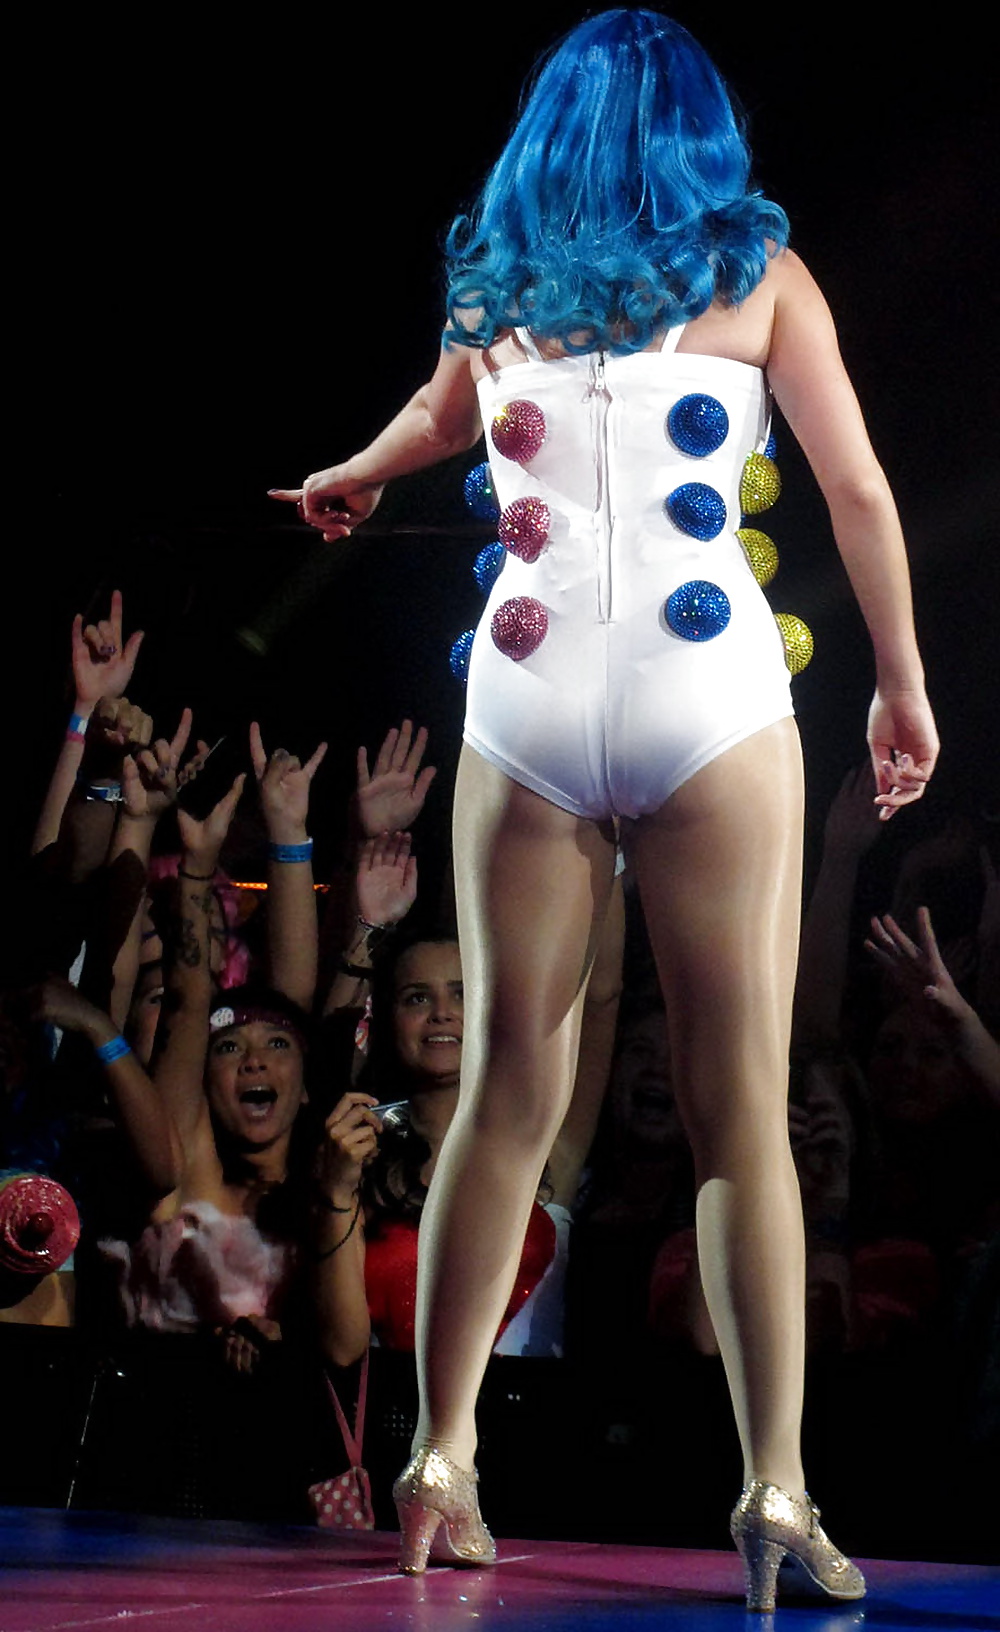 Katy perry tette, culo, colpi crotch
 #26378171